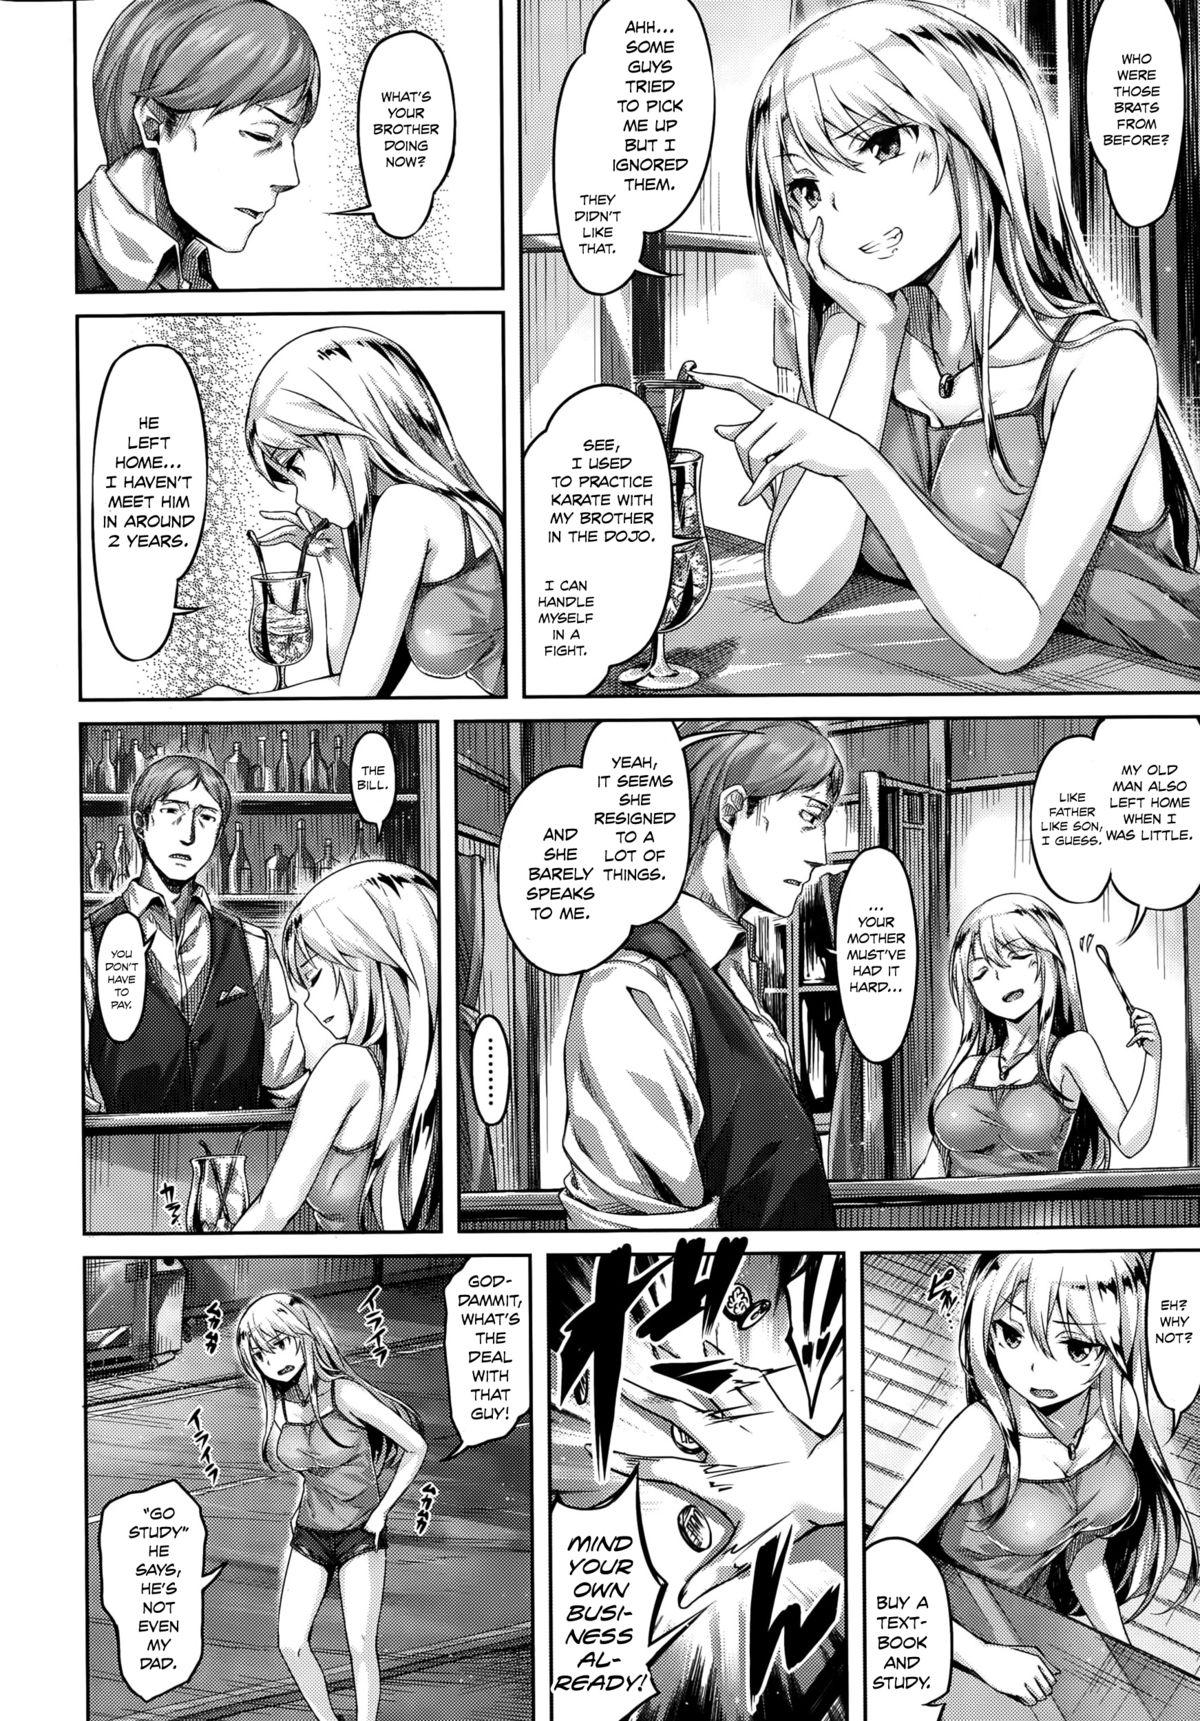 Big Dicks Akogare no Hito | My Loved One Massages - Page 4